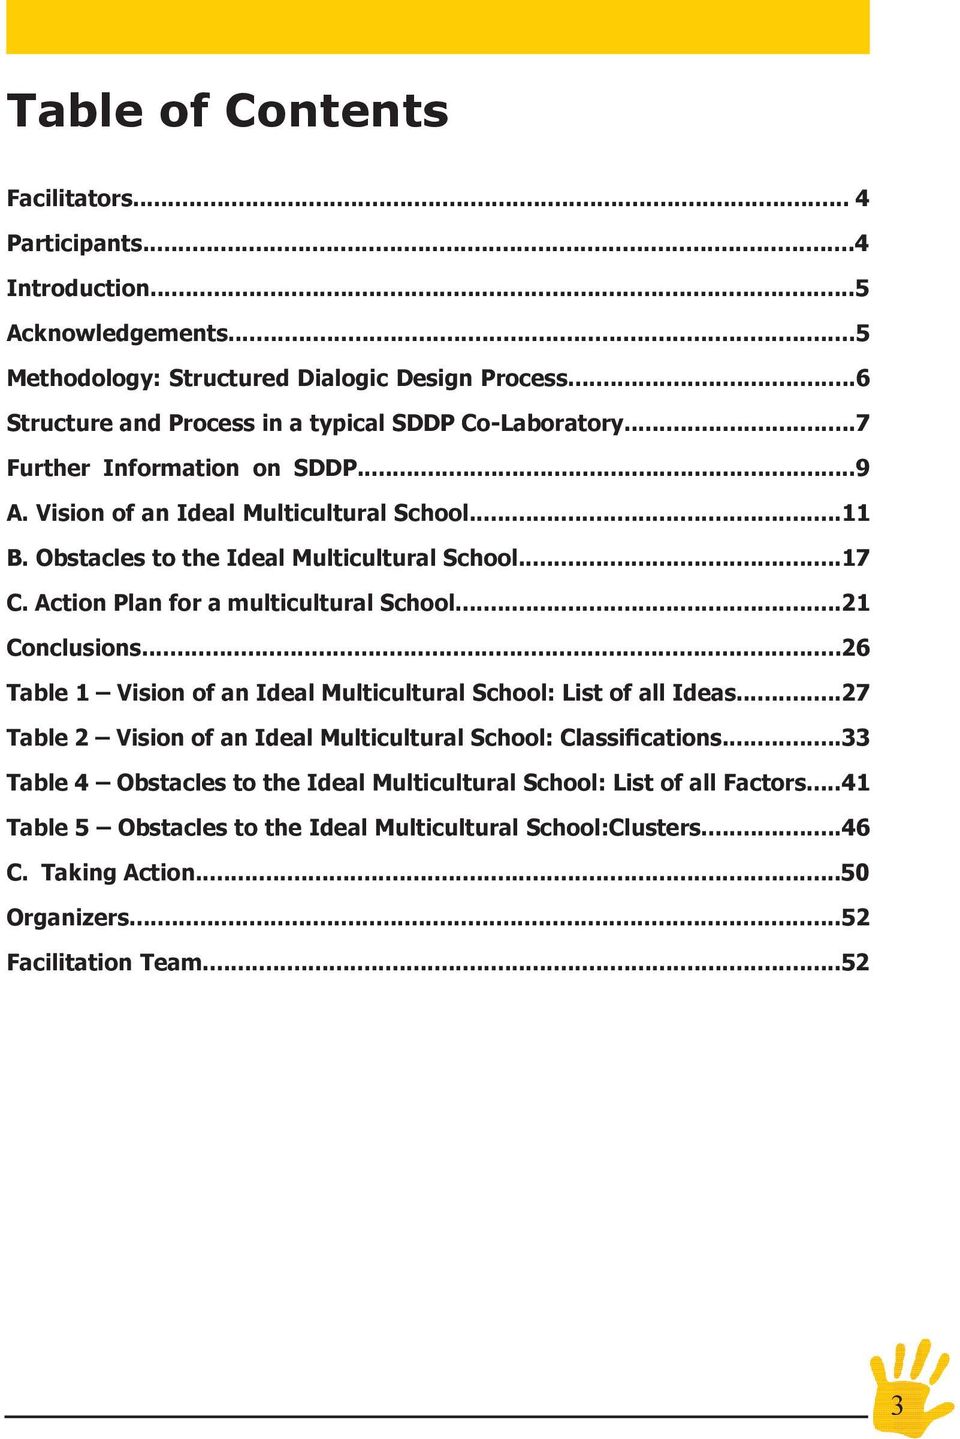 Obstacles to the Ideal Multicultural School...17 C. Action Plan for a multicultural School...21 Conclusions...26 Table 1 Vision of an Ideal Multicultural School: List of all Ideas.